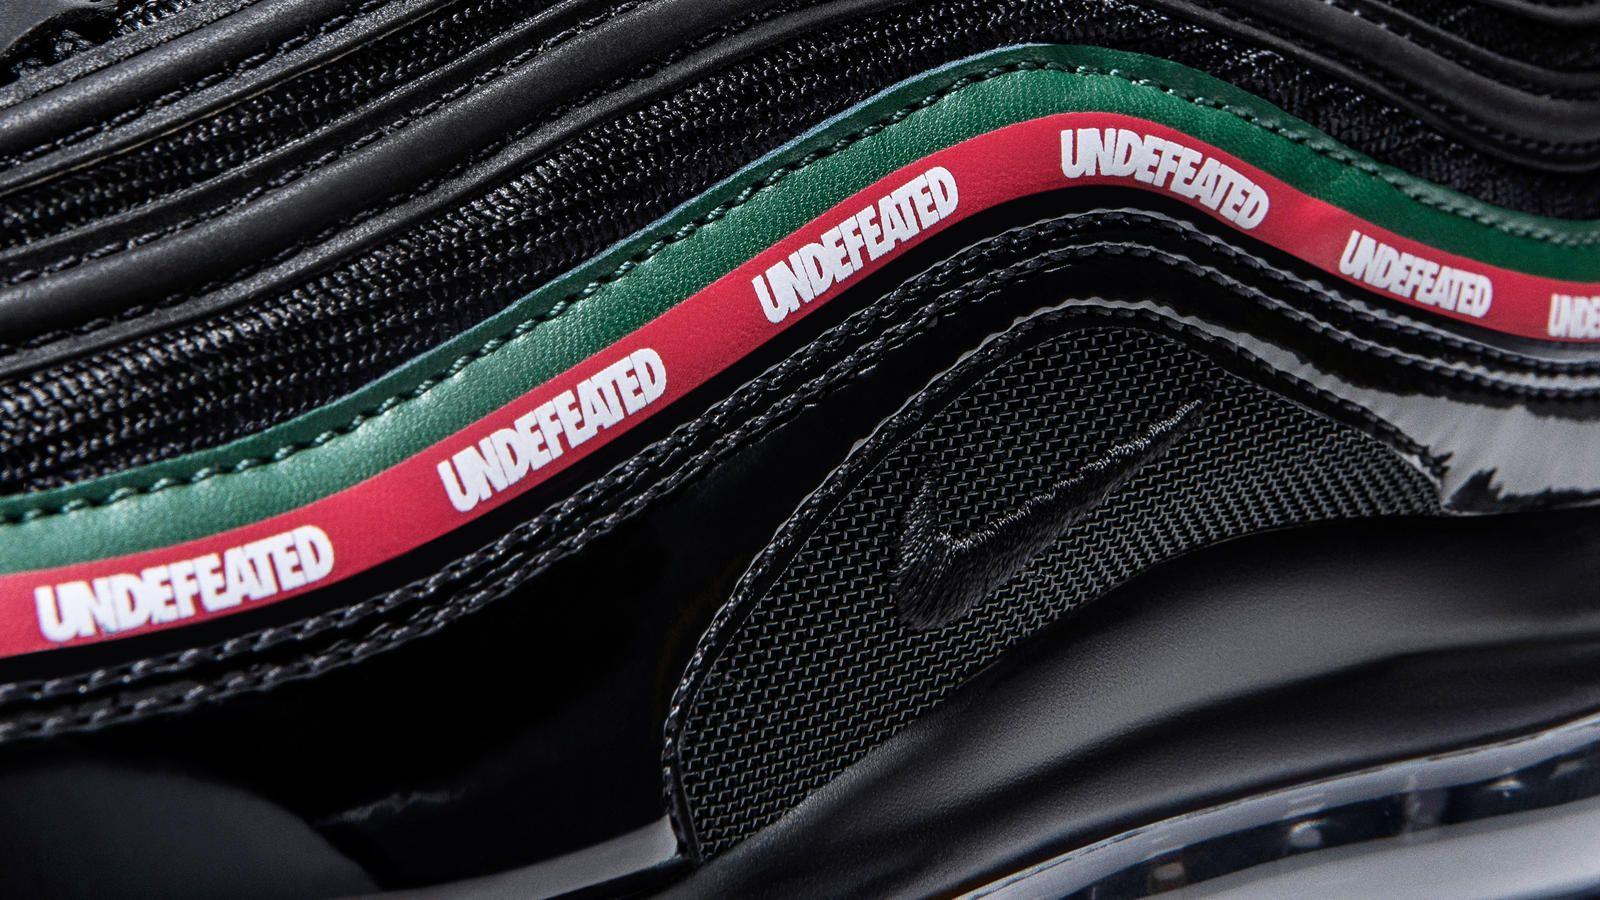 Nike Undefeated Logo - UNDFTD Gives the Air Max 97 a Luxury Twist